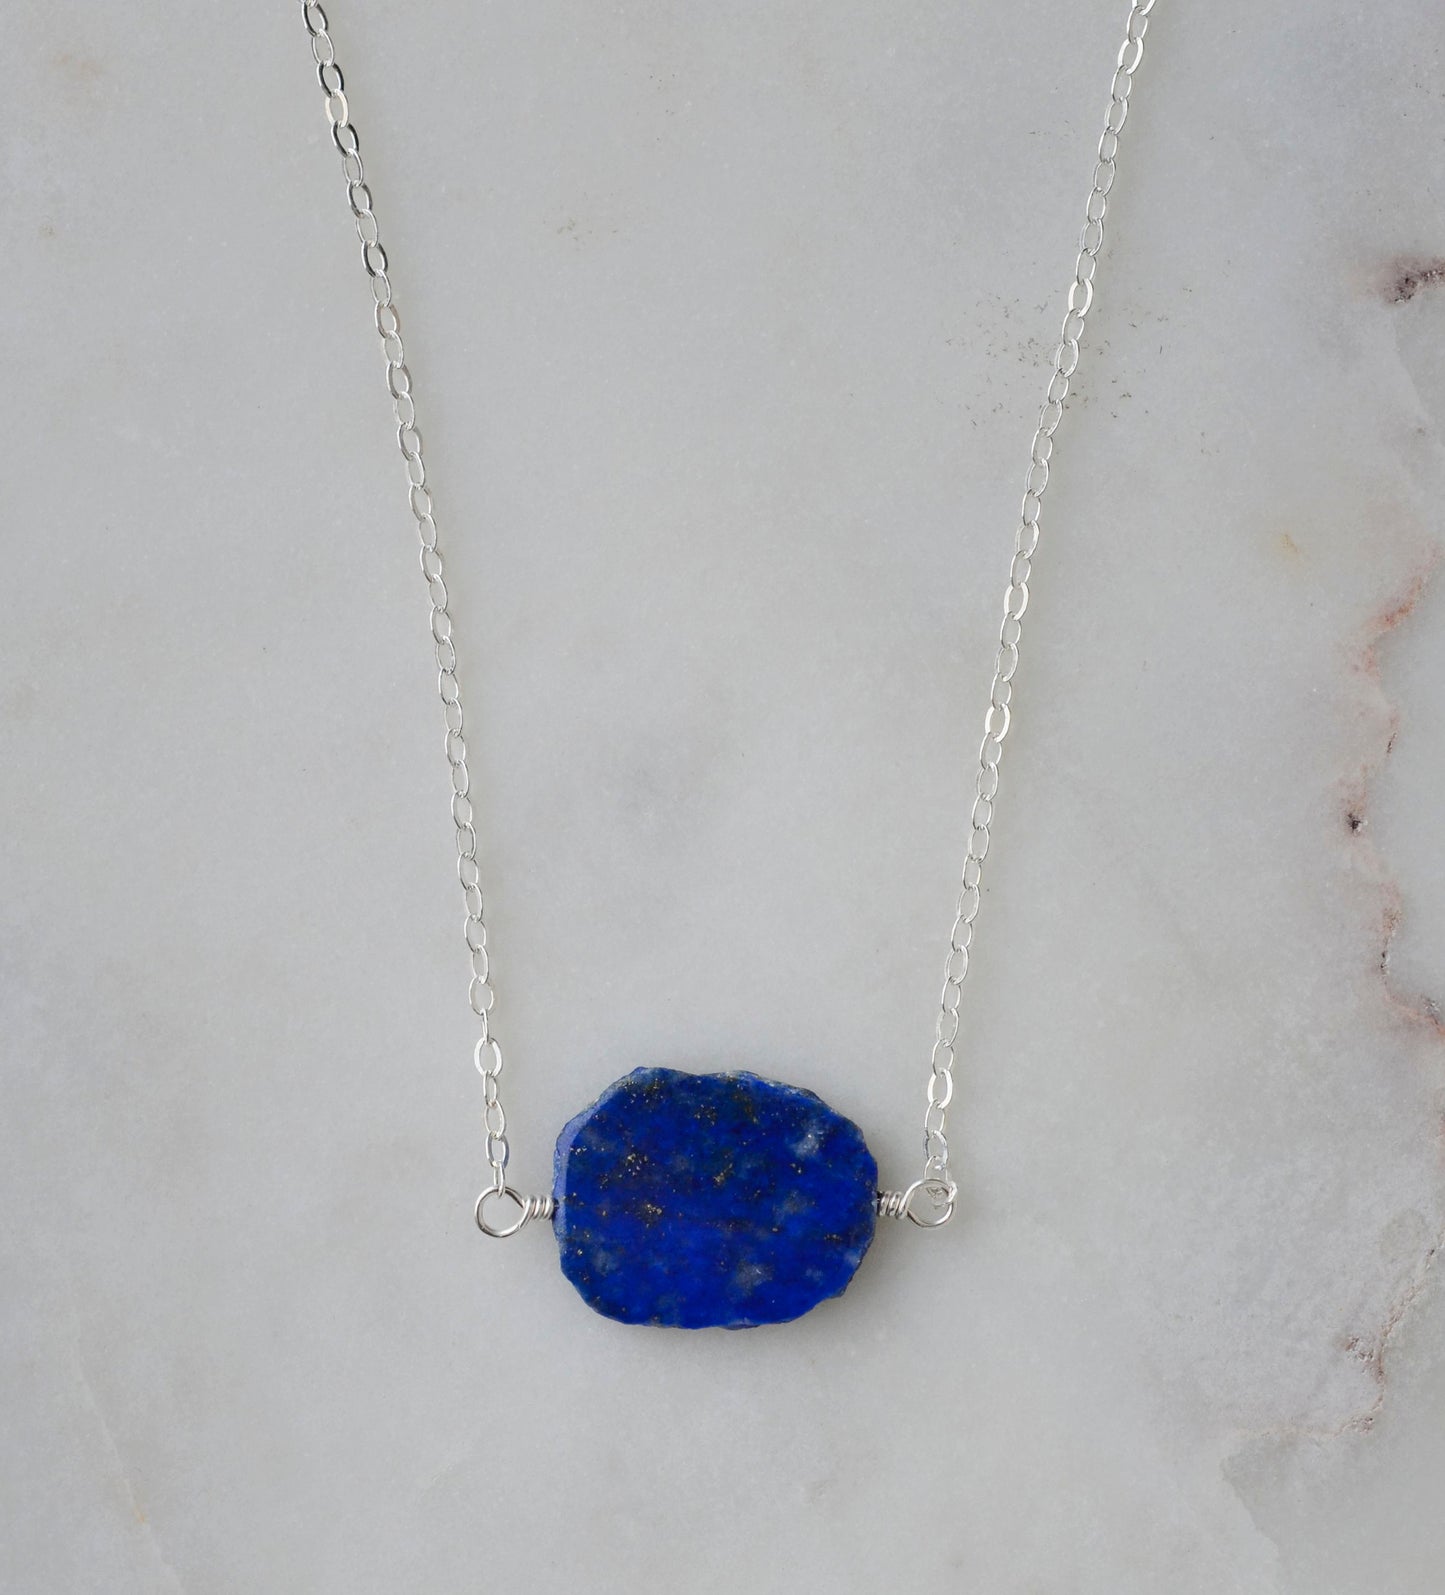 Natural blue lapis lazuli slice set onto a sterling silver chain. The stone is smooth polished with raw edges and oval in shape. Natural pyrite and calcite flecks are visible within each stone. 